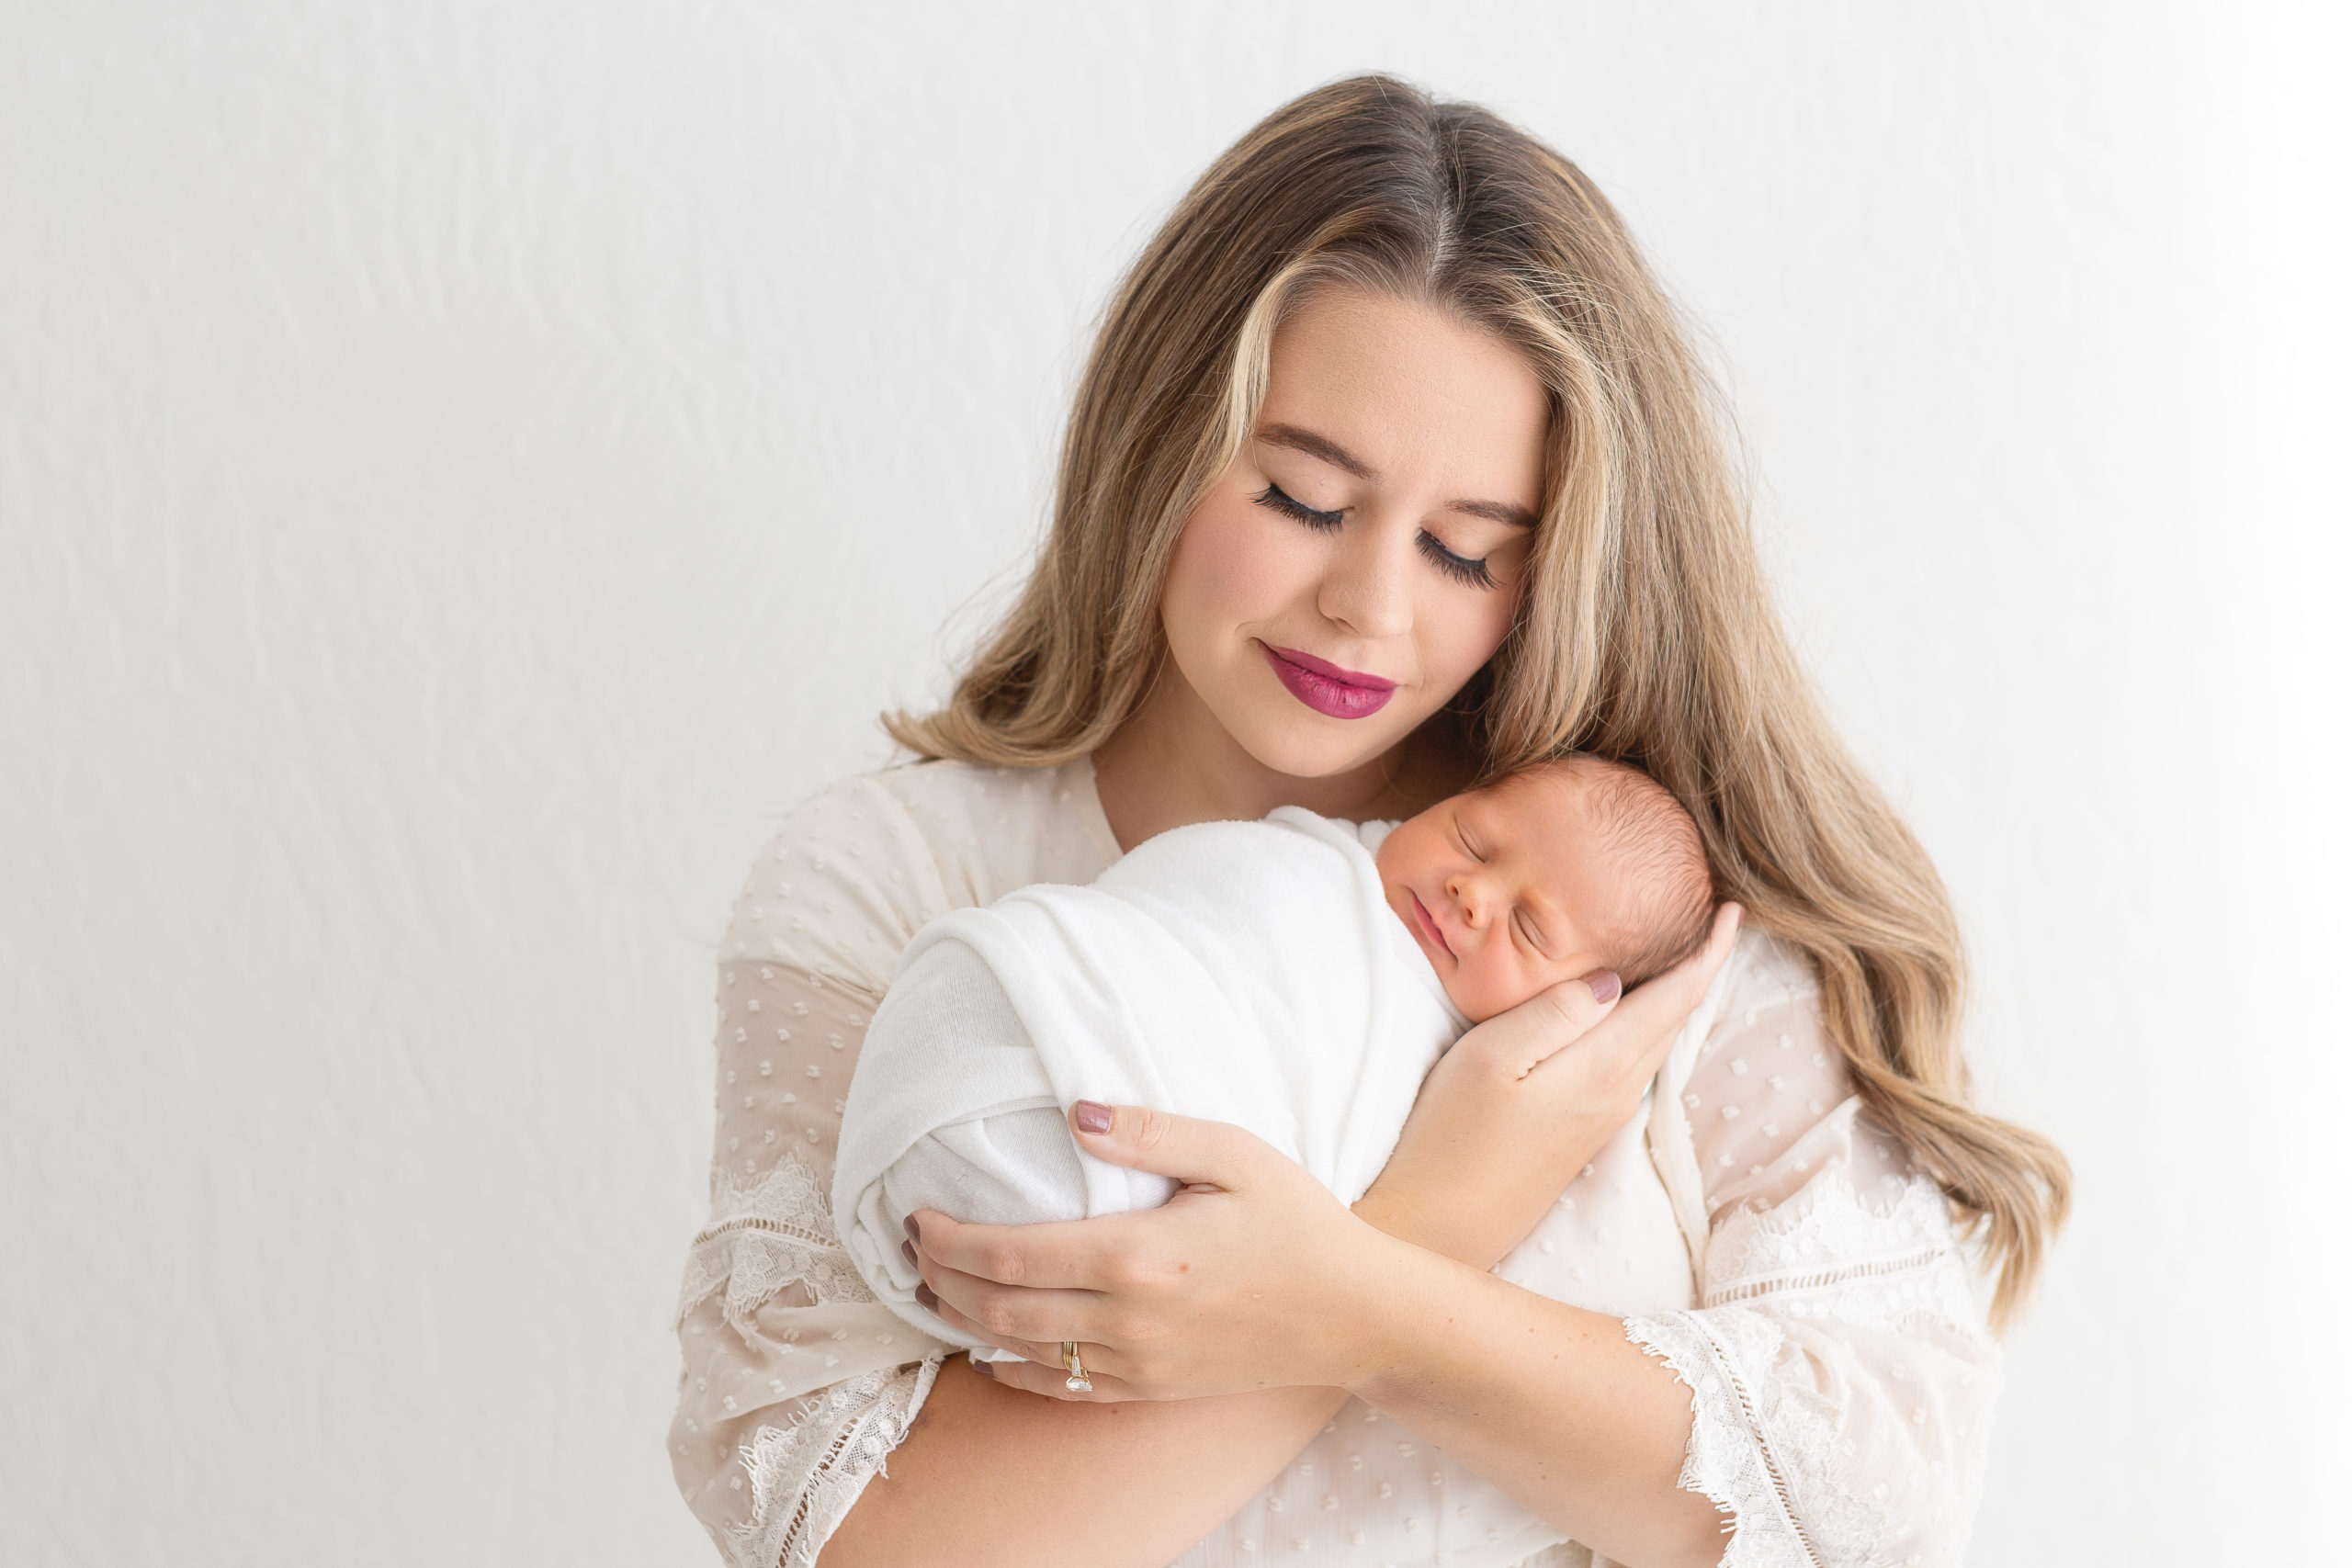 my favorite photographs are new moms with their baby